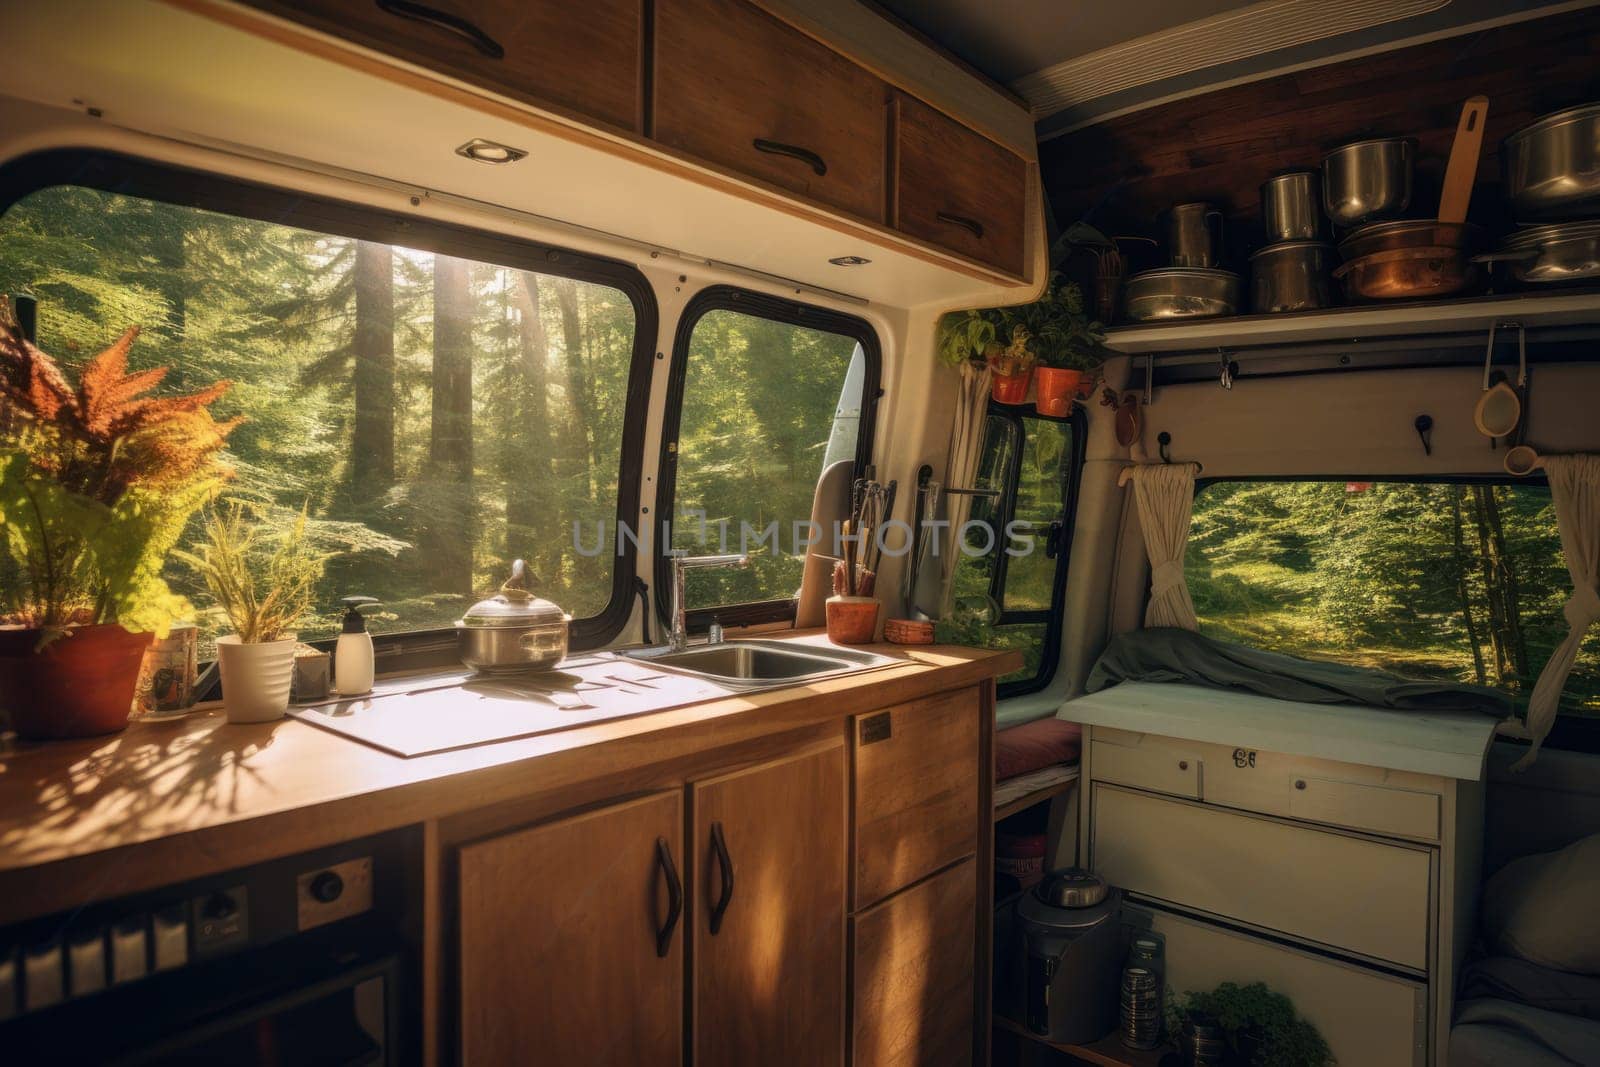 Mobile Kitchen campervan. Modern vehicle vacation. Generate Ai